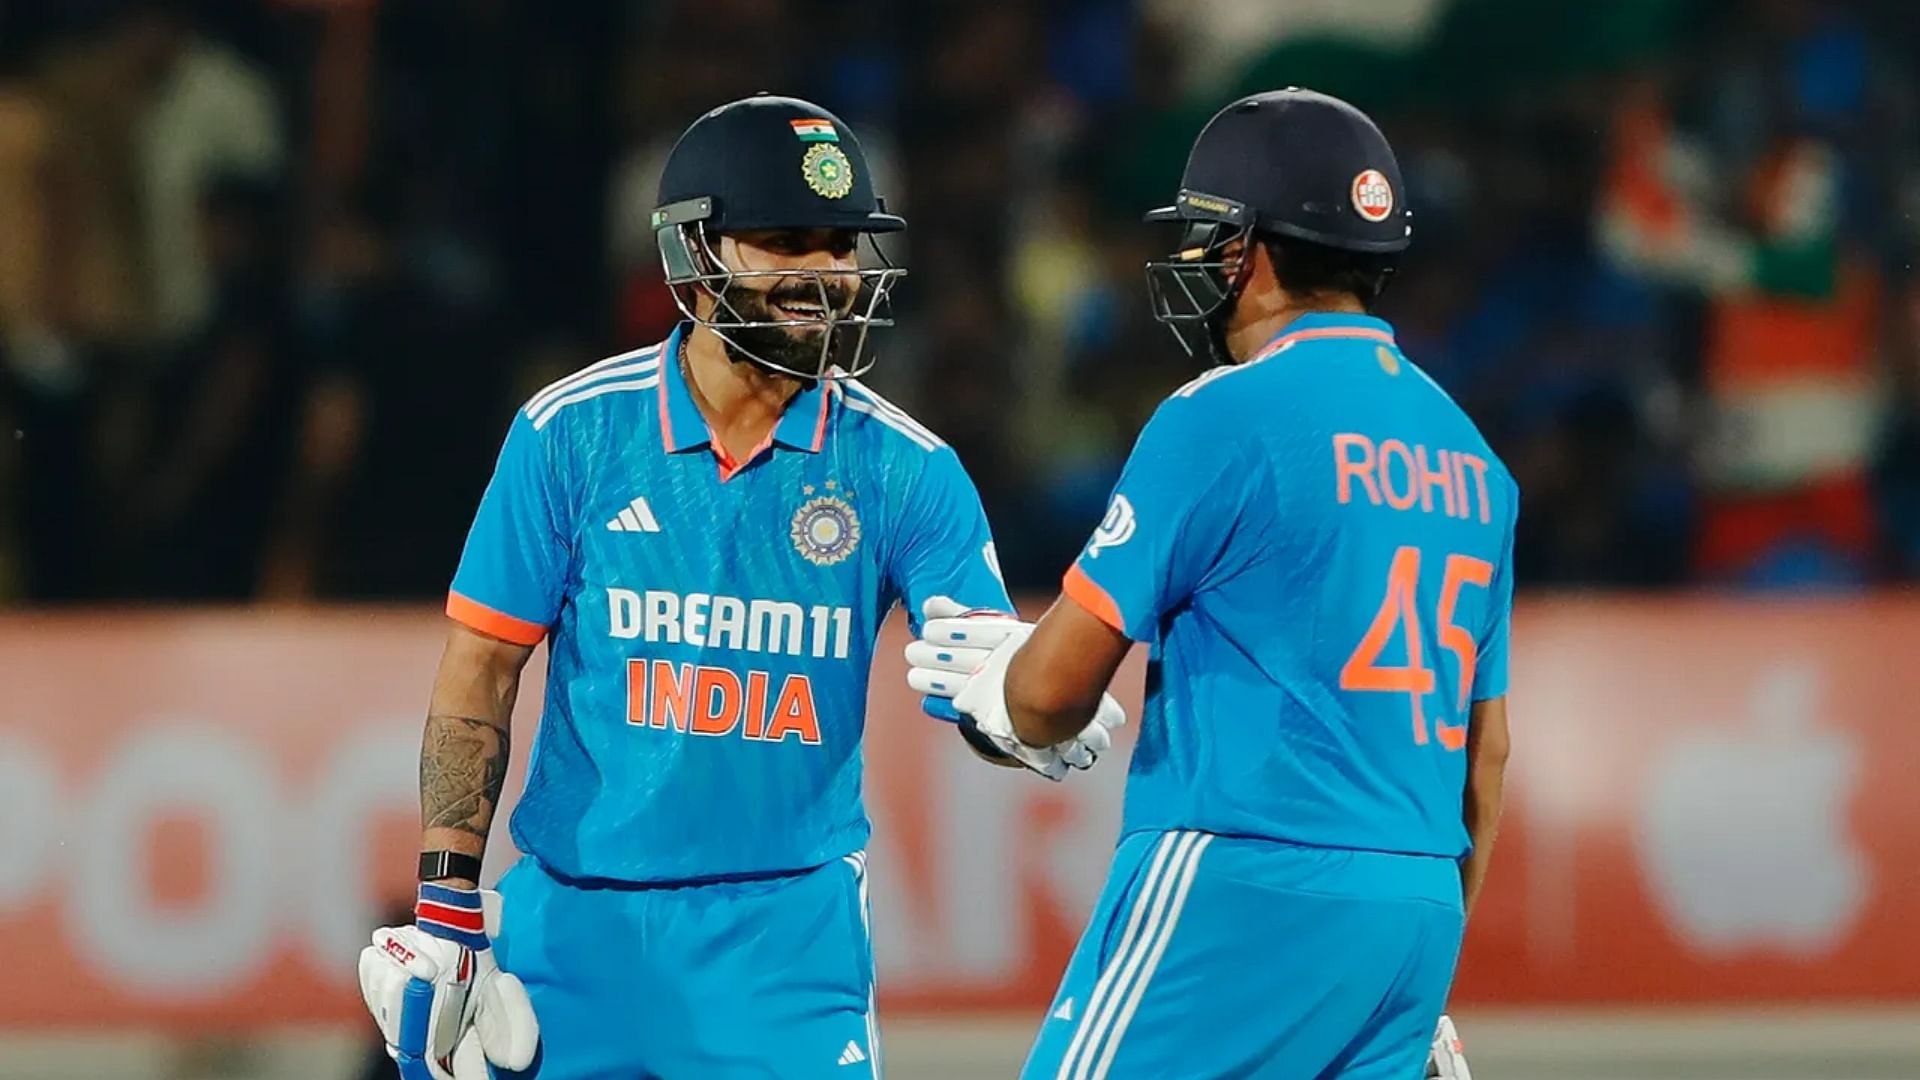 IND vs SA Doubt over selection of Virat Kohli and Rohit Sharma for T20 and ODI series against South Africa